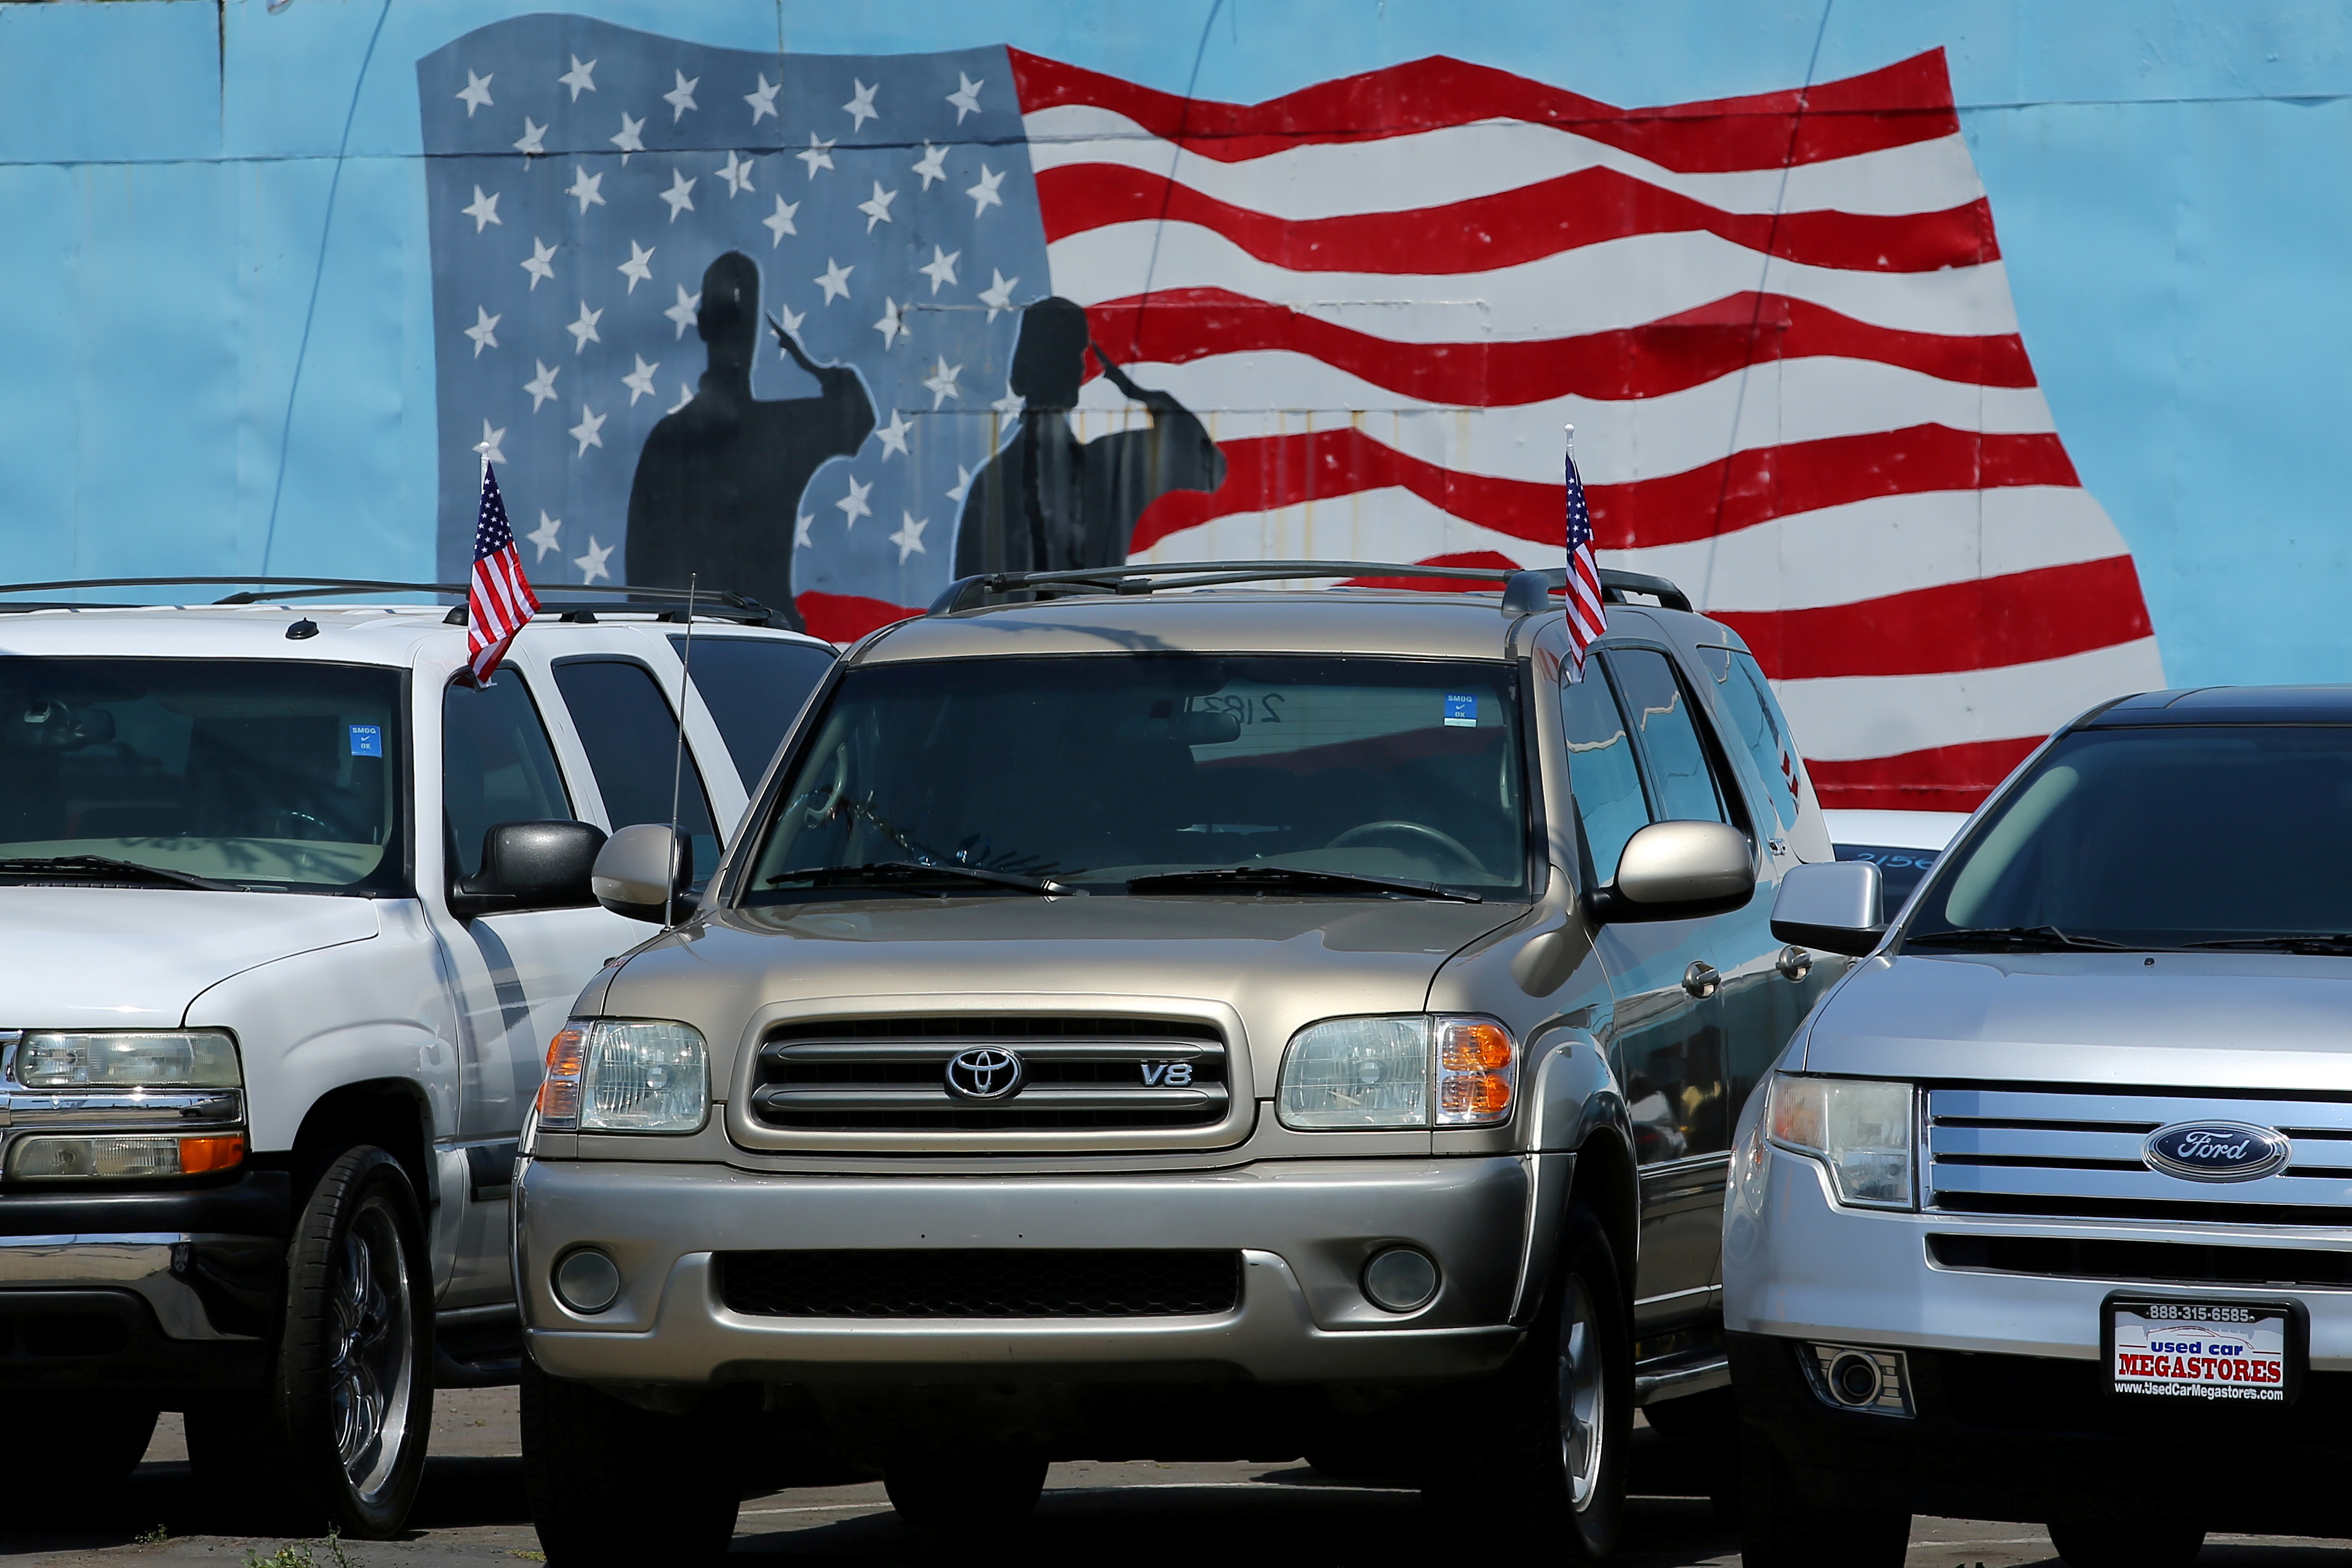 Cars are shown for sale with financing at a car lot in National City, California